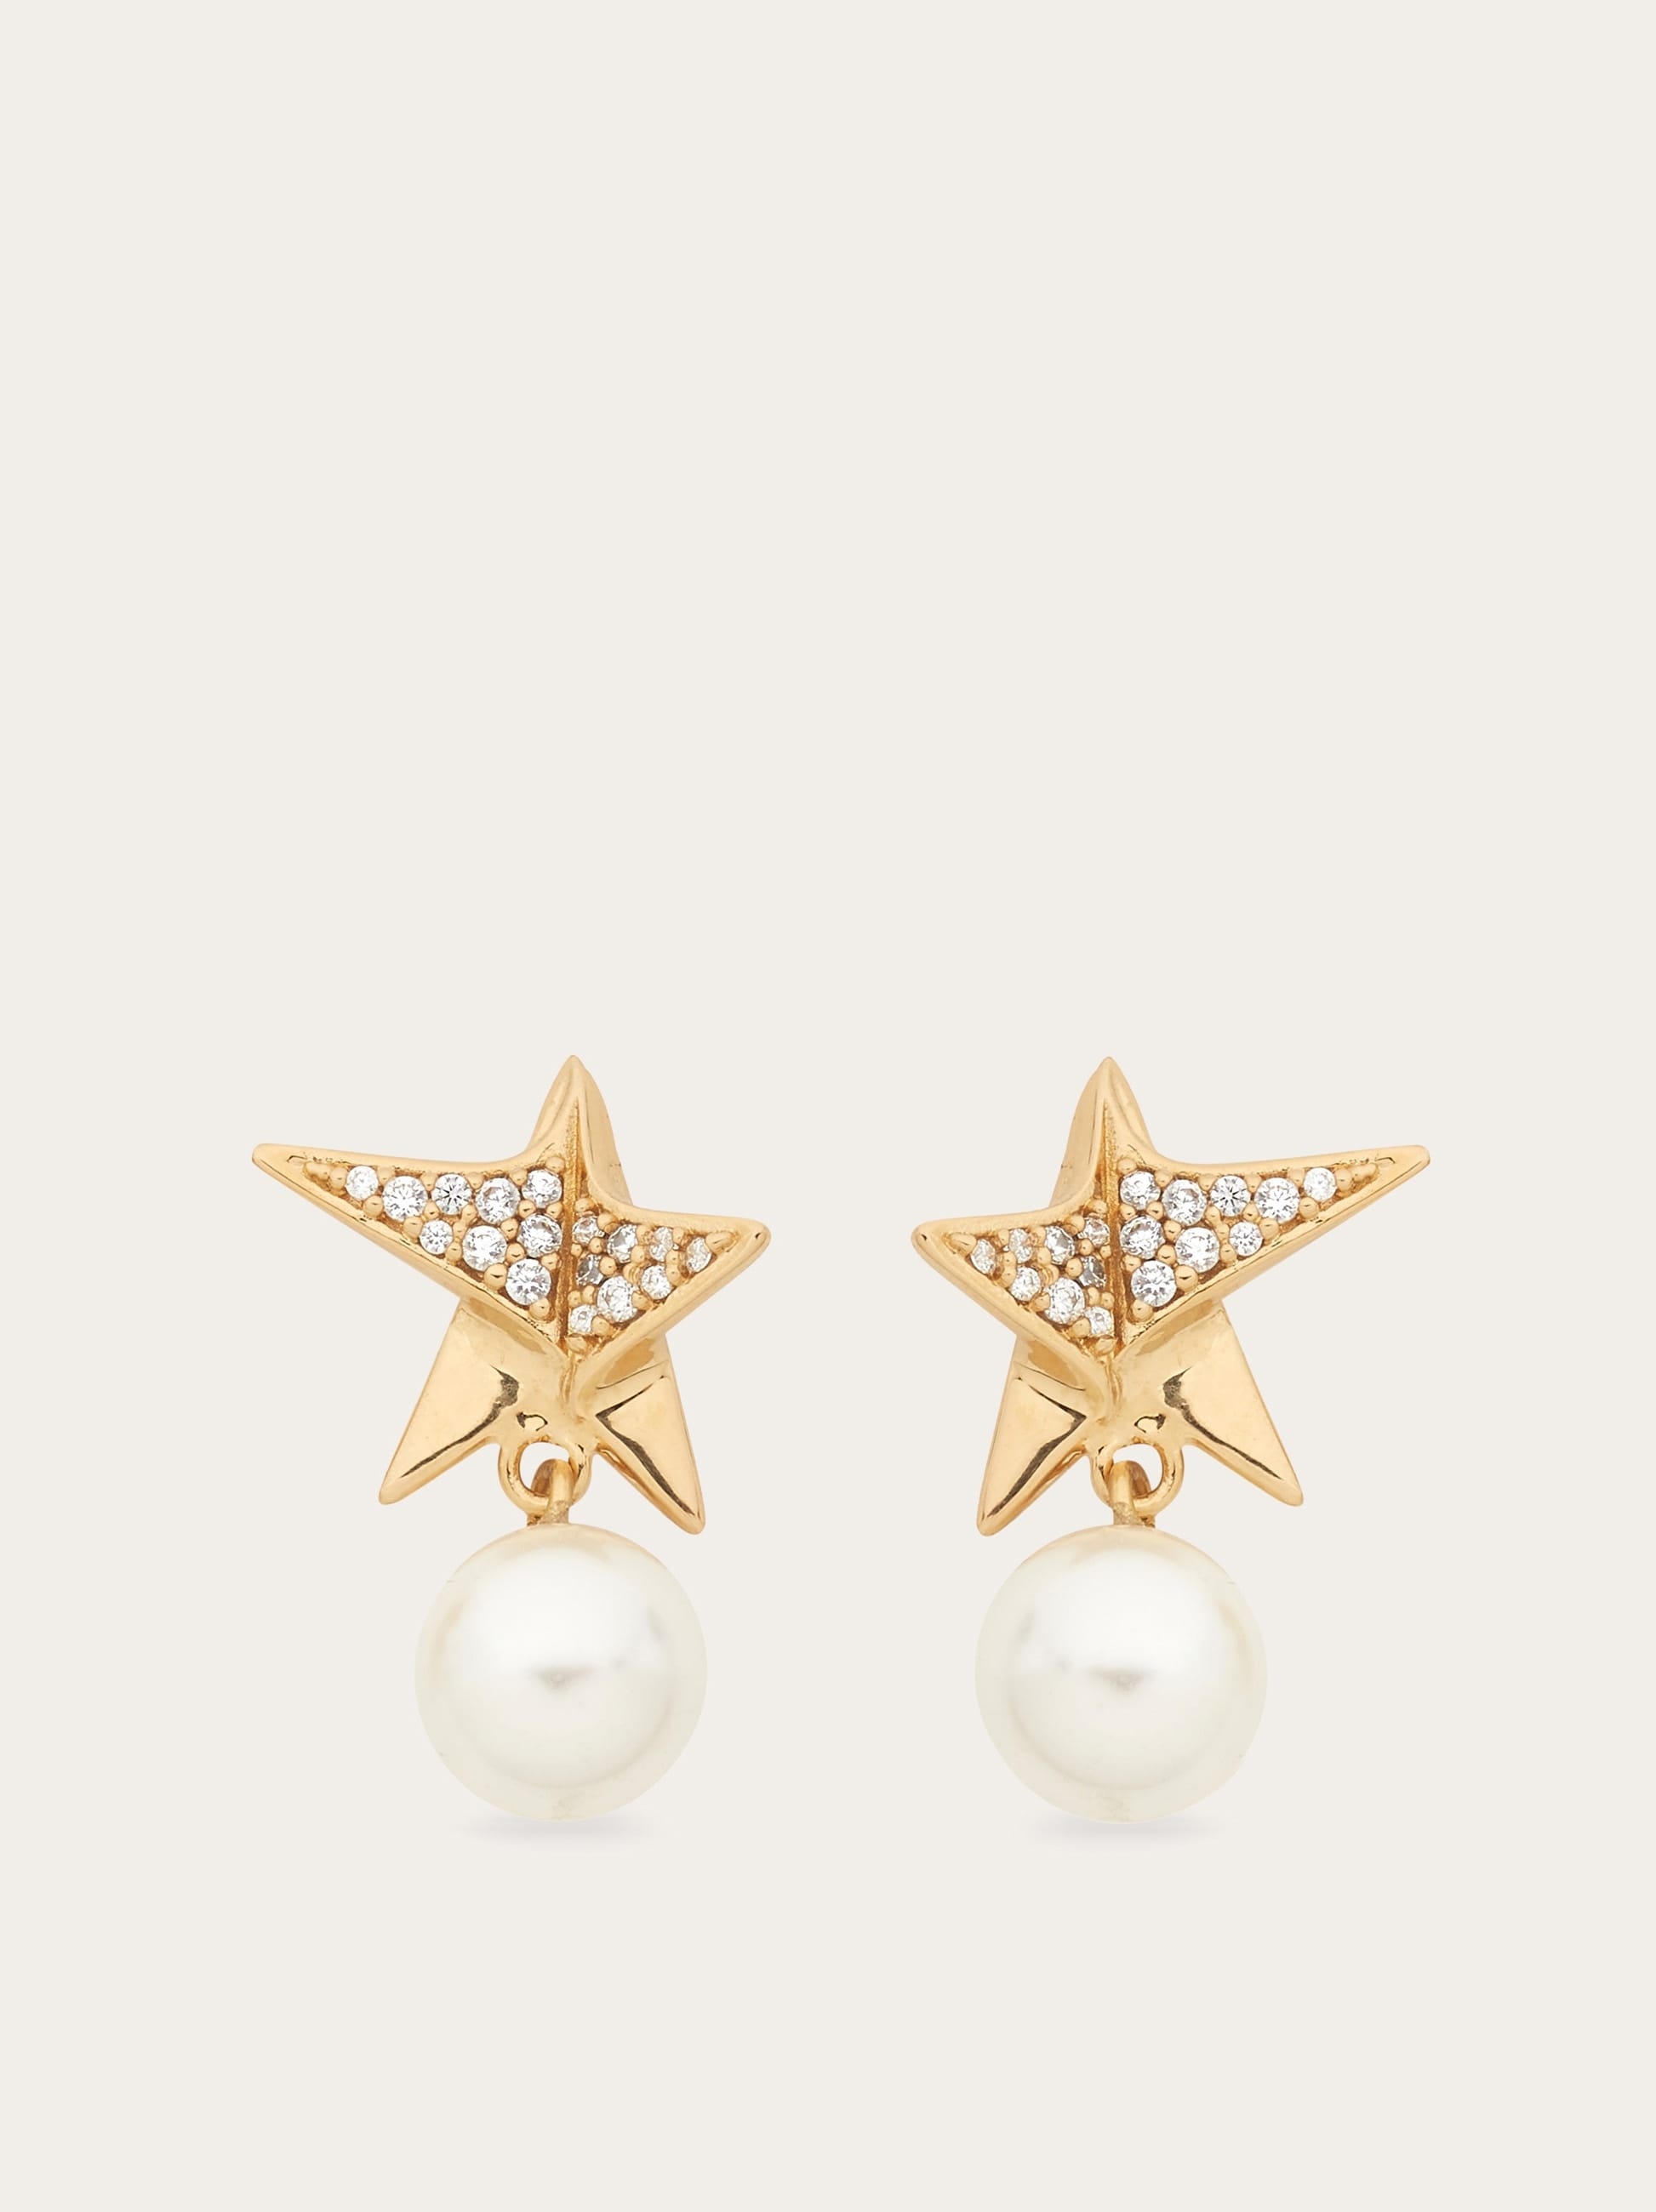 Star earrings with crystals - 1